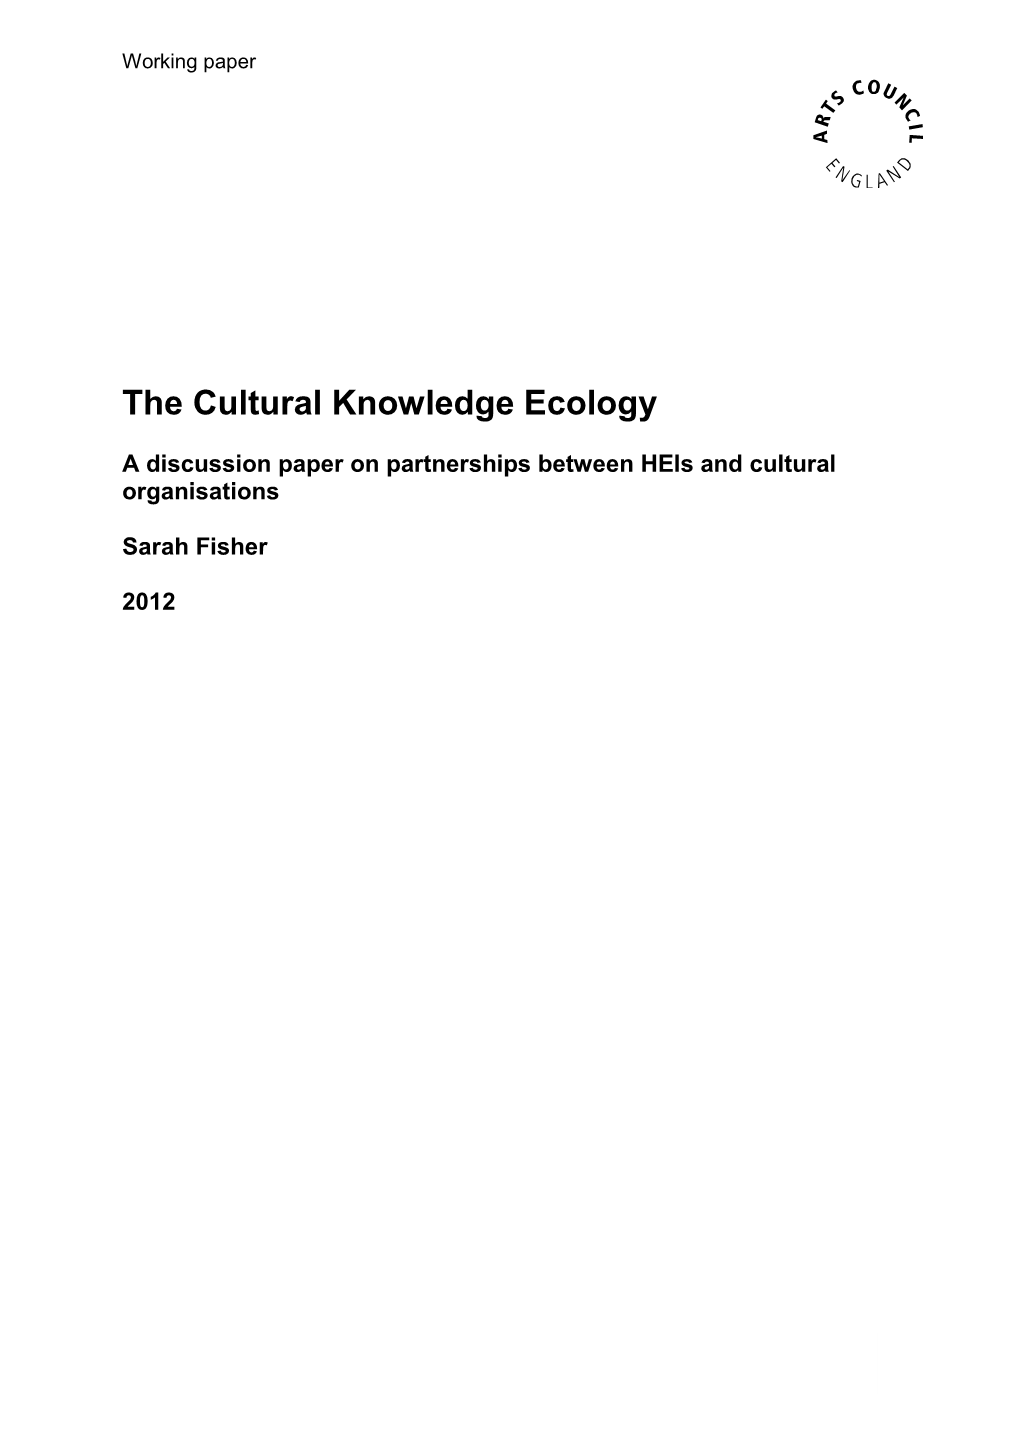 The Cultural Knowledge Ecology